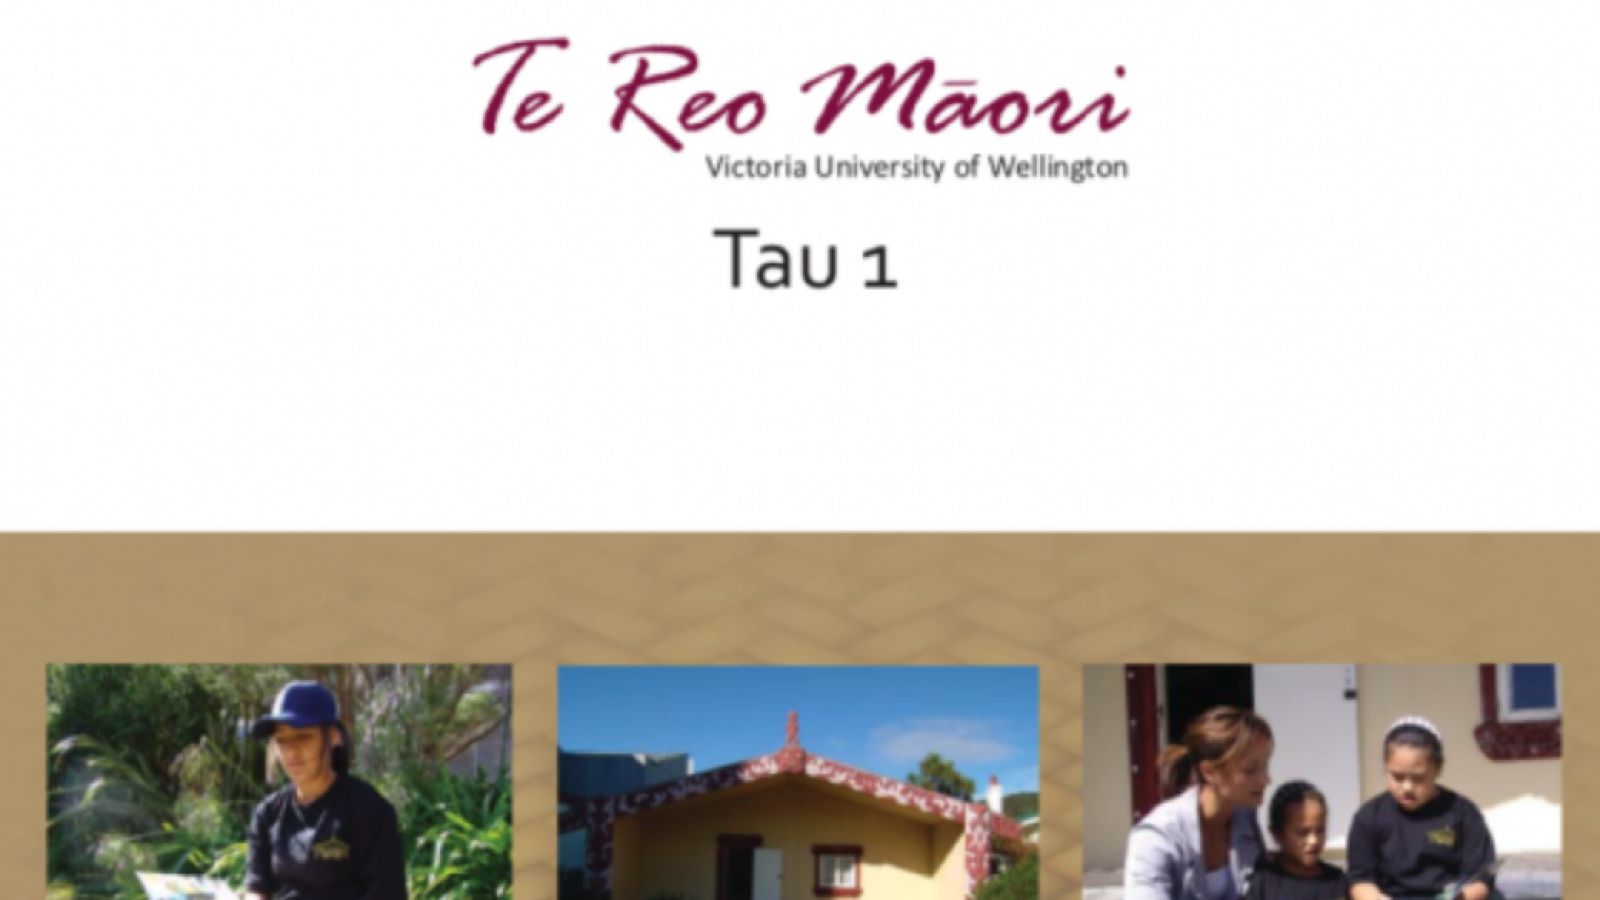 Te reo Māori e-book cover, with three photos on the front: the first is a teenage girl reading a book, the second is a marae, and the third is a woman looking at a book with two young girls.